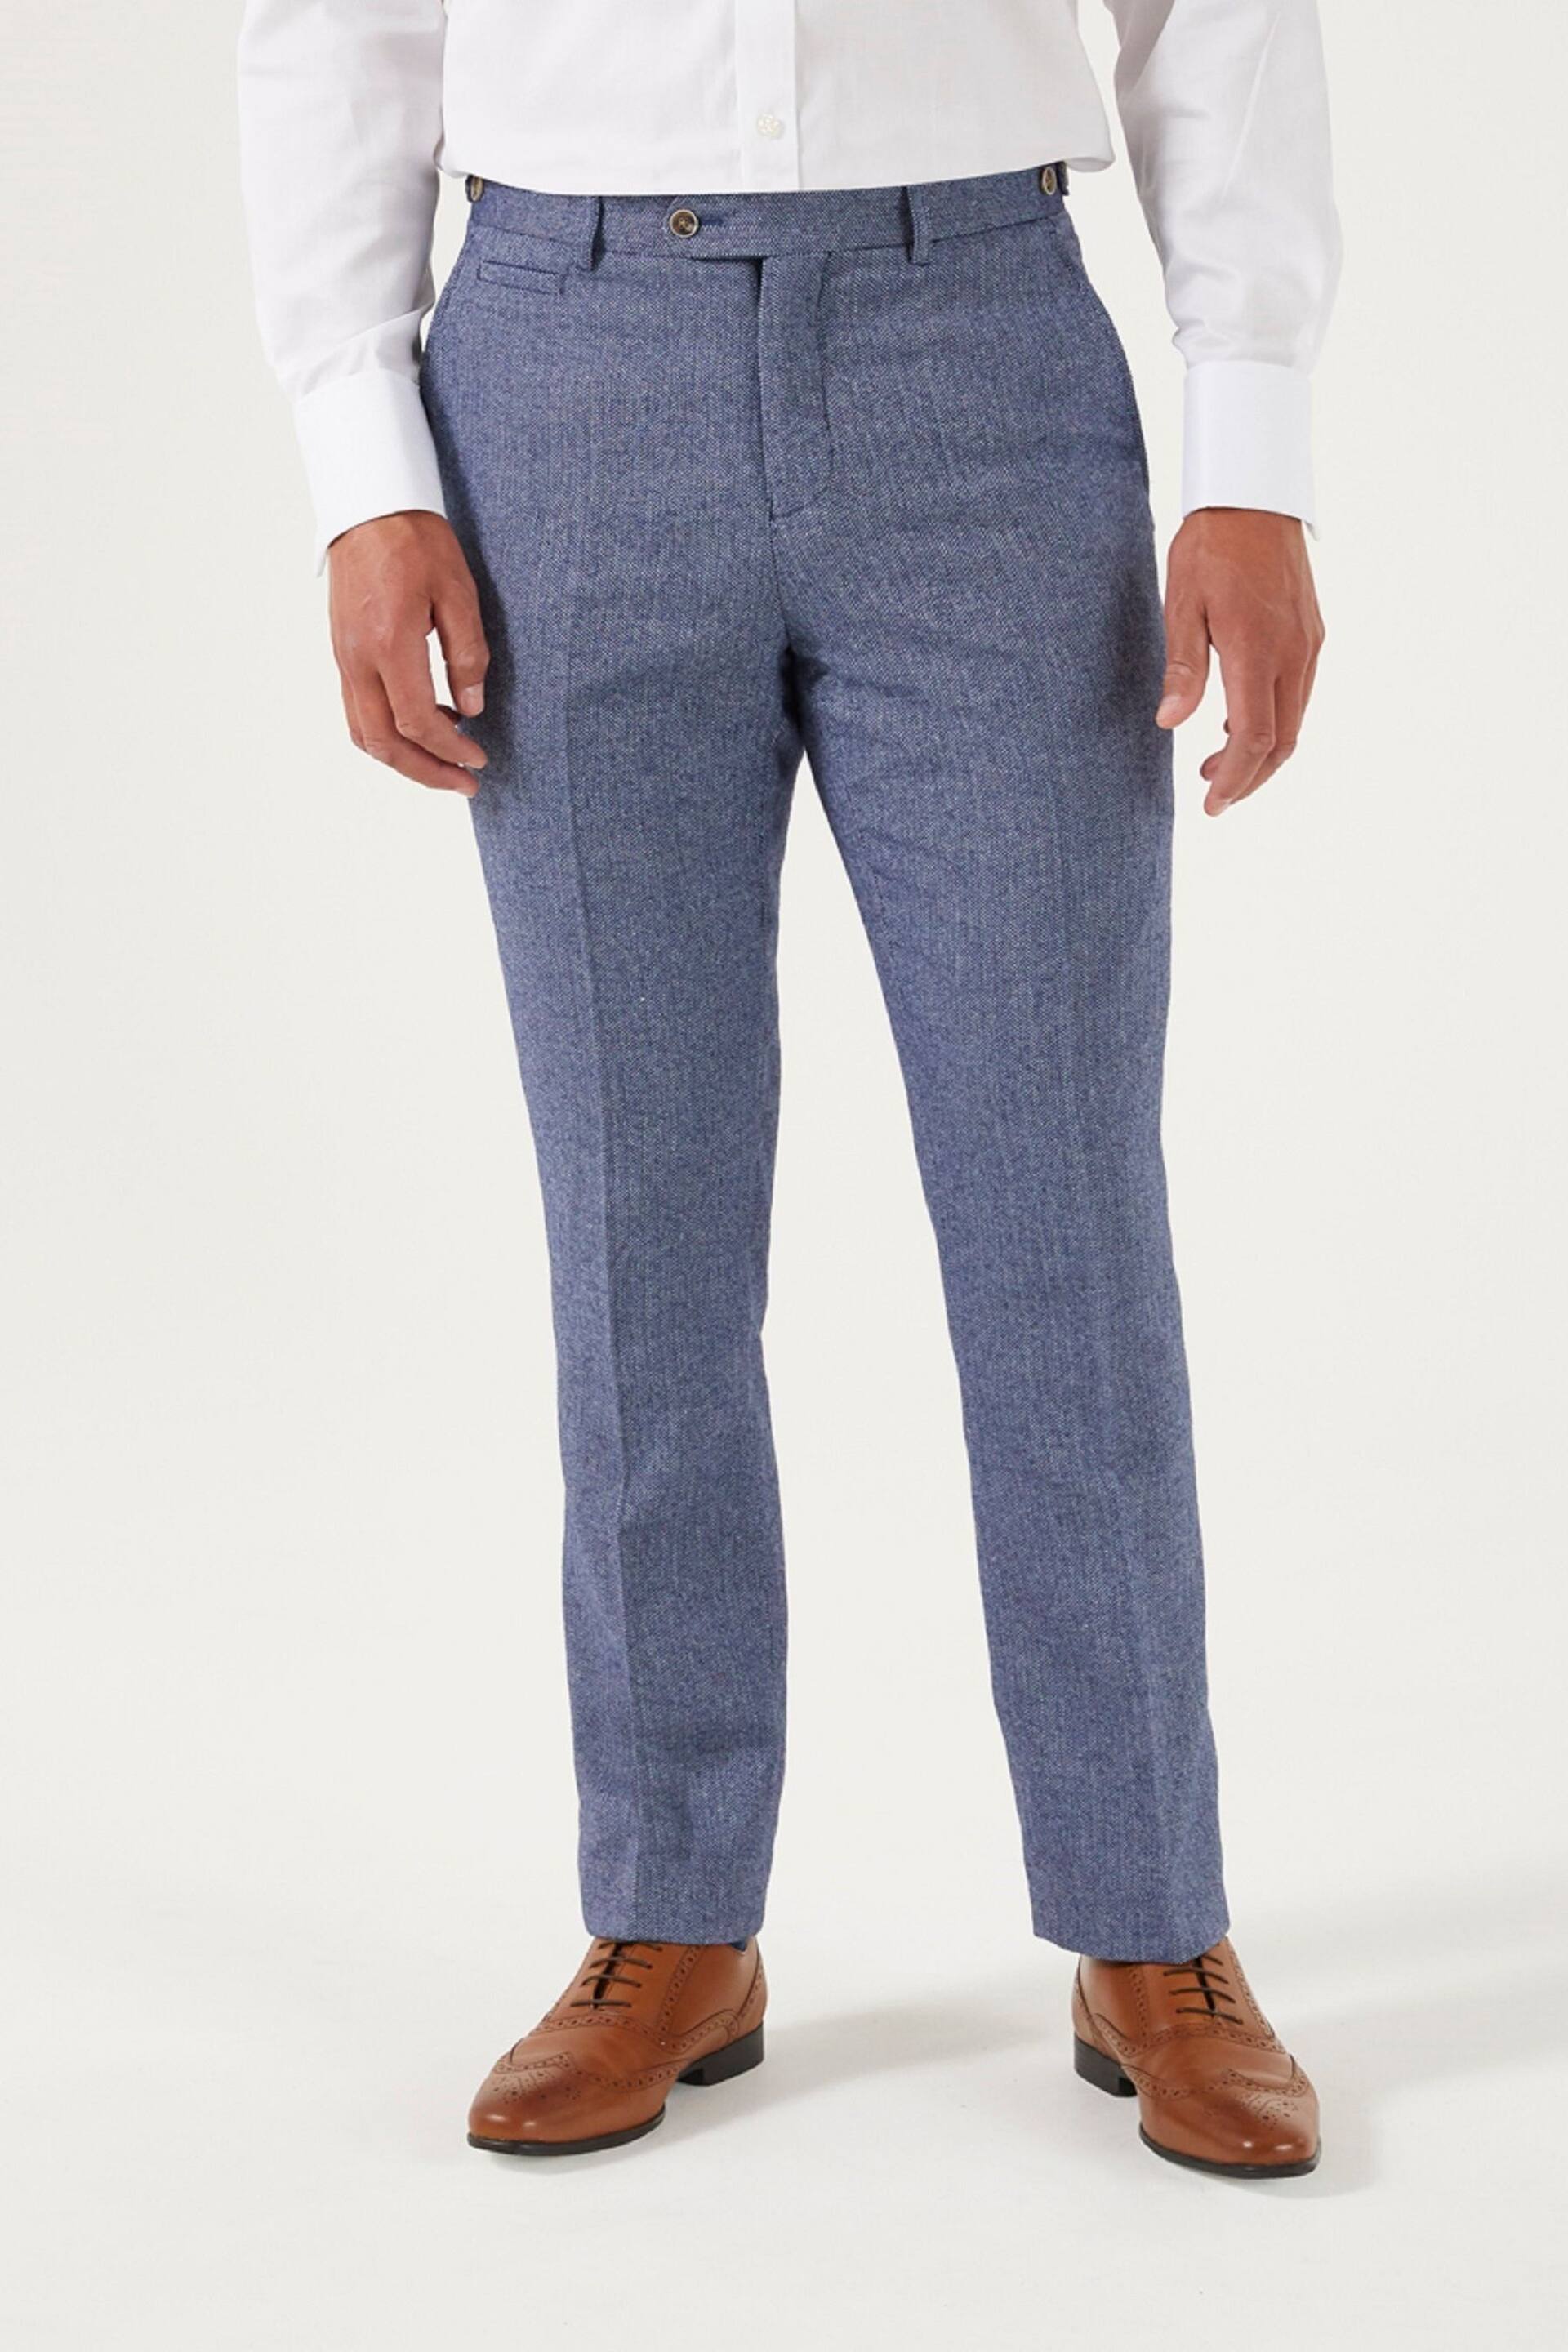 Skopes Jude Tweed Tailored Fit Suit Trousers - Image 1 of 4